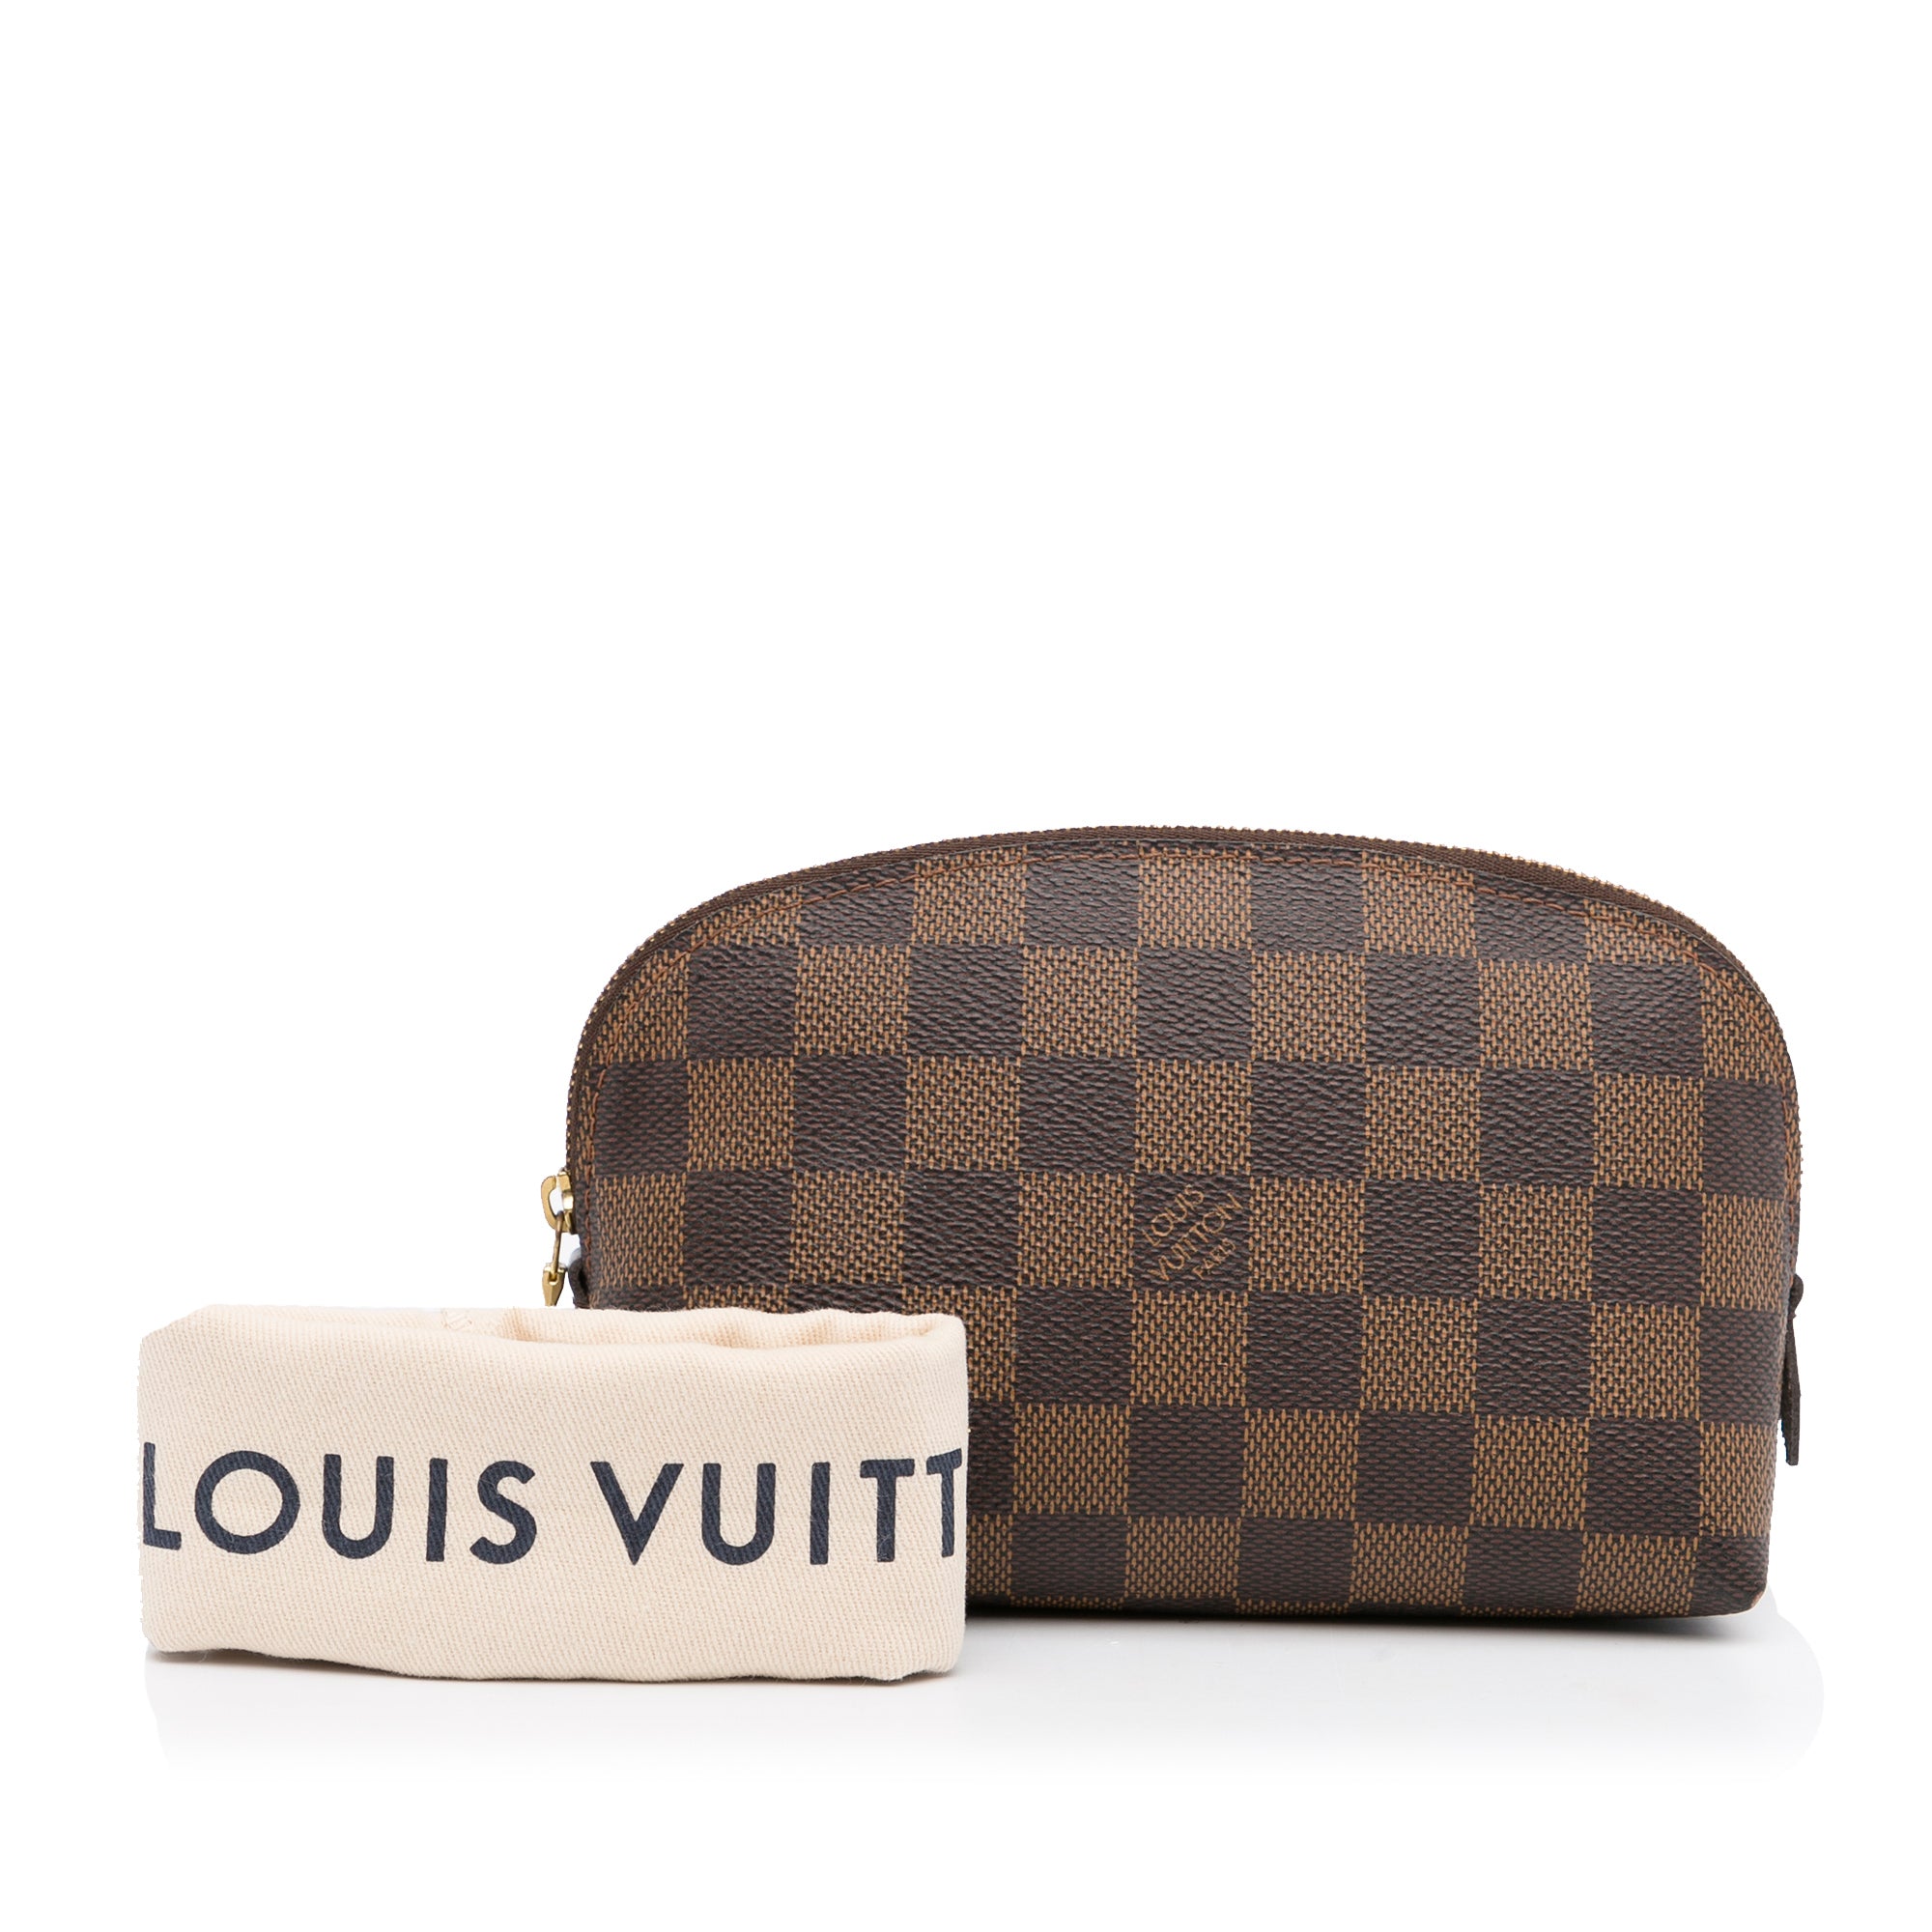 We Review The Louis Vuitton Toiletry Pouch in Damier Graphite